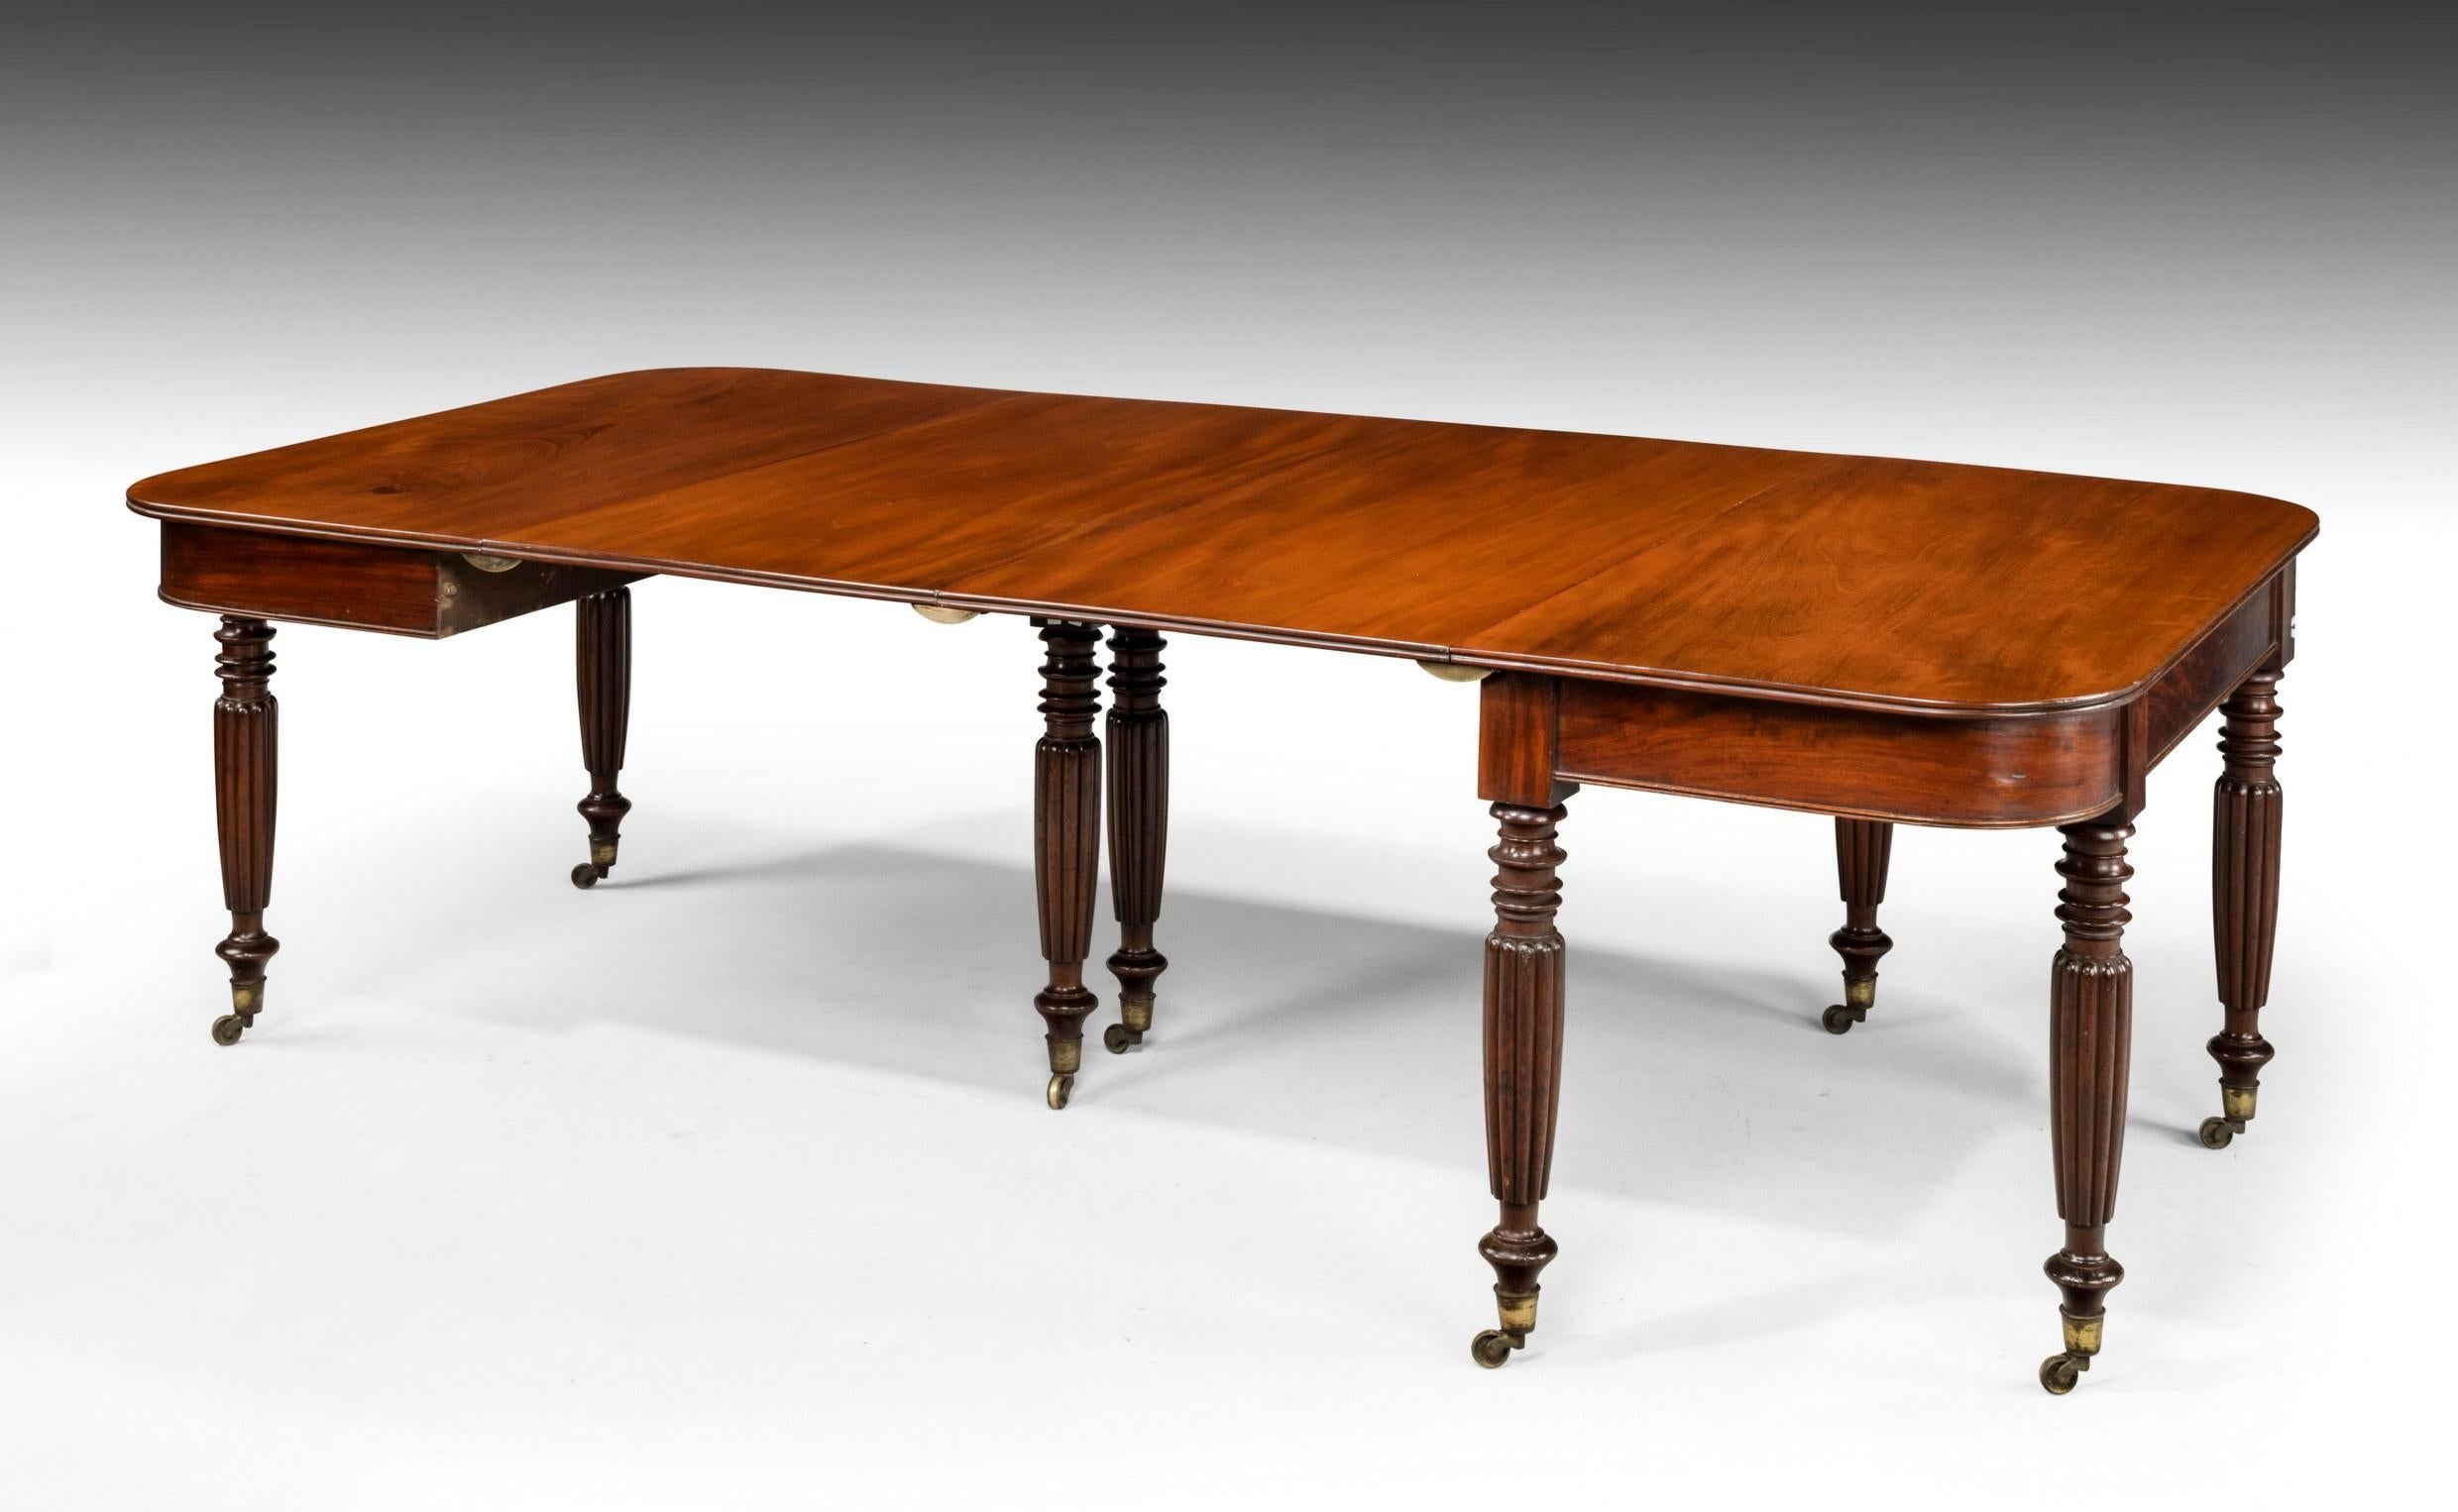 Most adaptable late Regency mahogany two-section dining table with three additional leaves. Capable of seating 4–12 persons.

D ends 1 leaf:
Width 68.50 inches.

D ends 2 leaves:
Width 90 inches.

D ends 3 leaves:
Width 111.50 inches.